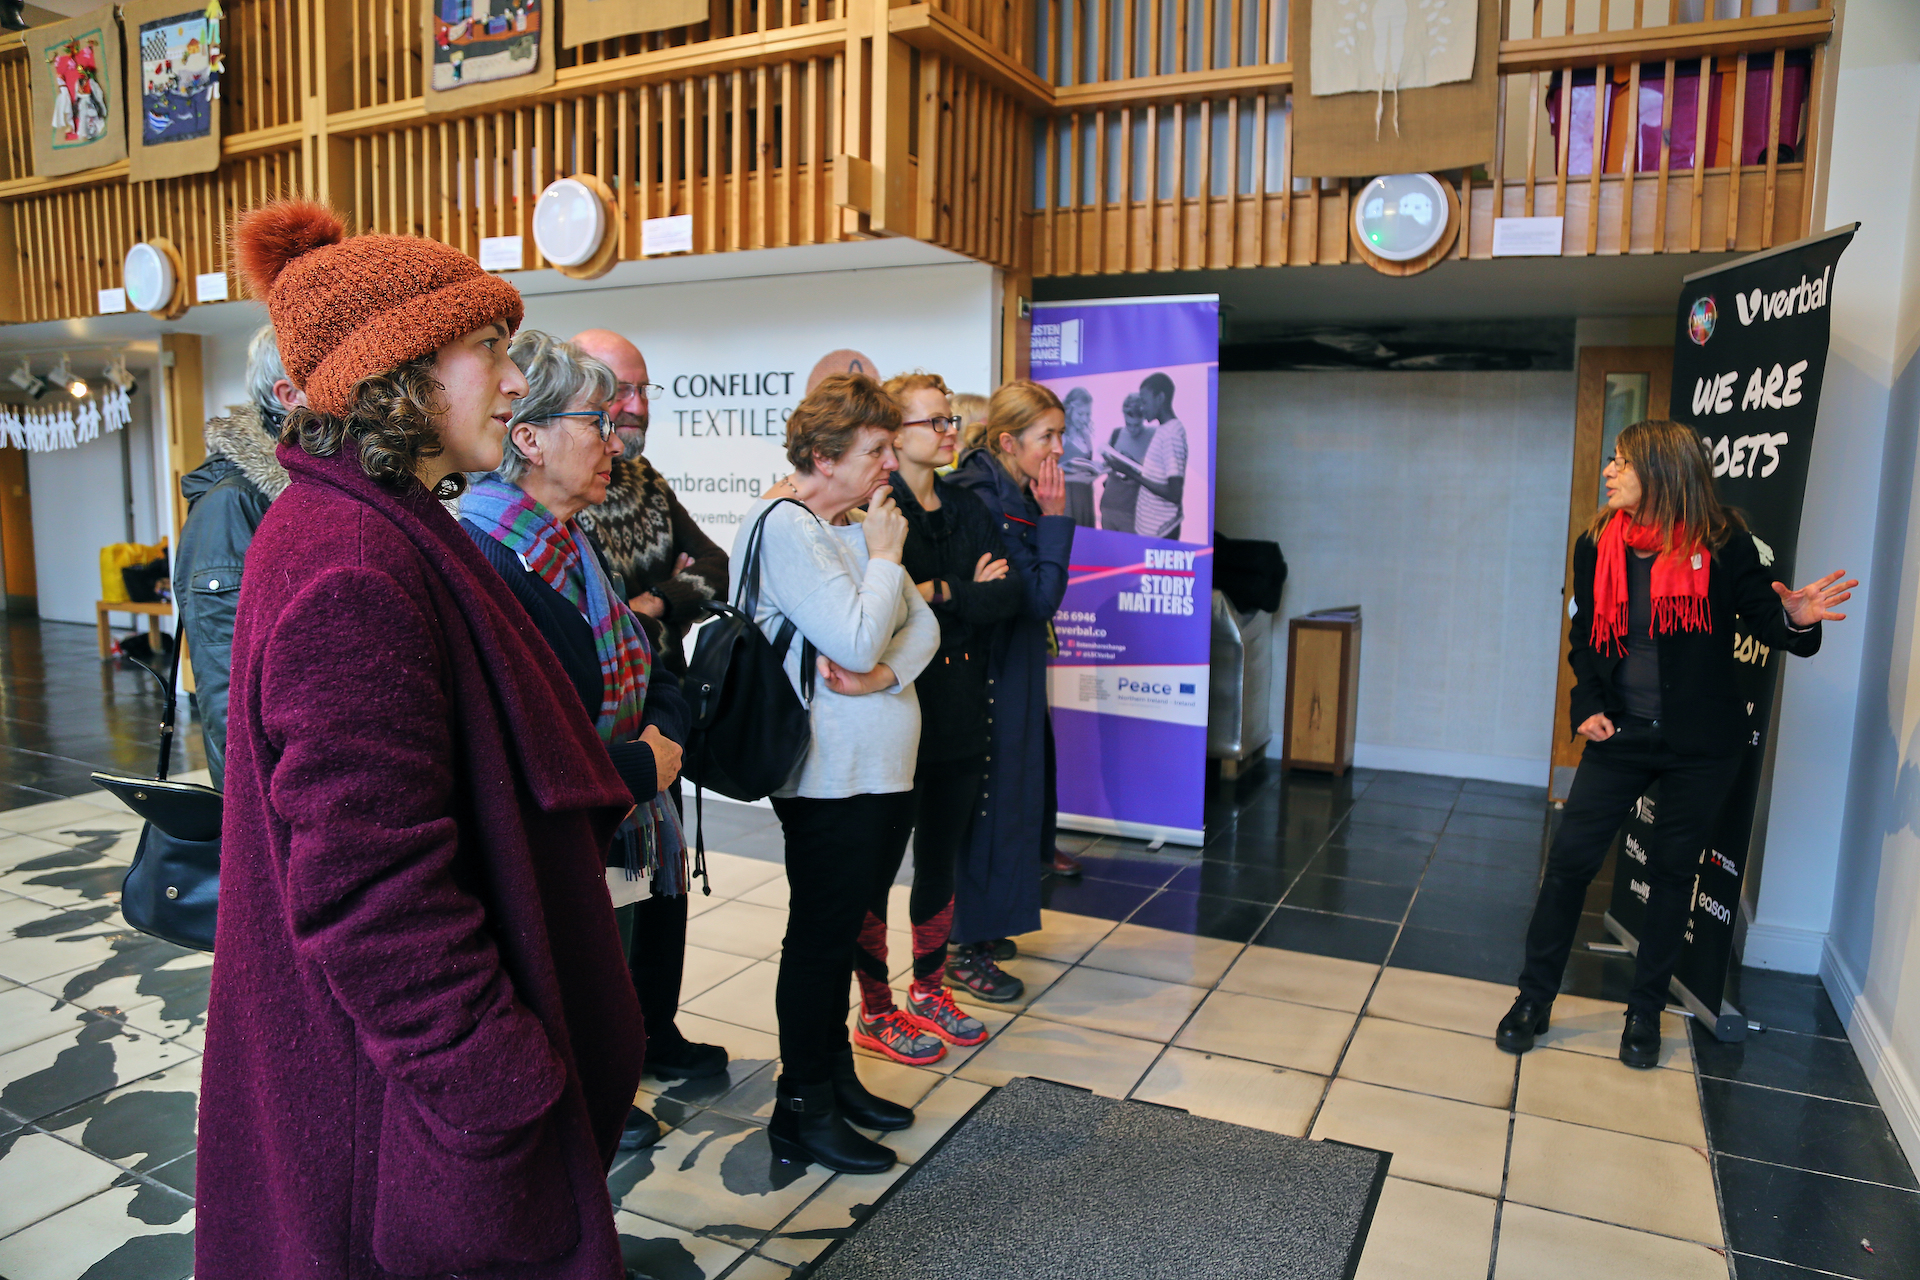 Members of the Echo Echo Dance Theatre Company engrossed in the guided tour of the exhibition by curator Roberta Bacic on 22nd November, 2019. (Photo: Rory Mc Carron)